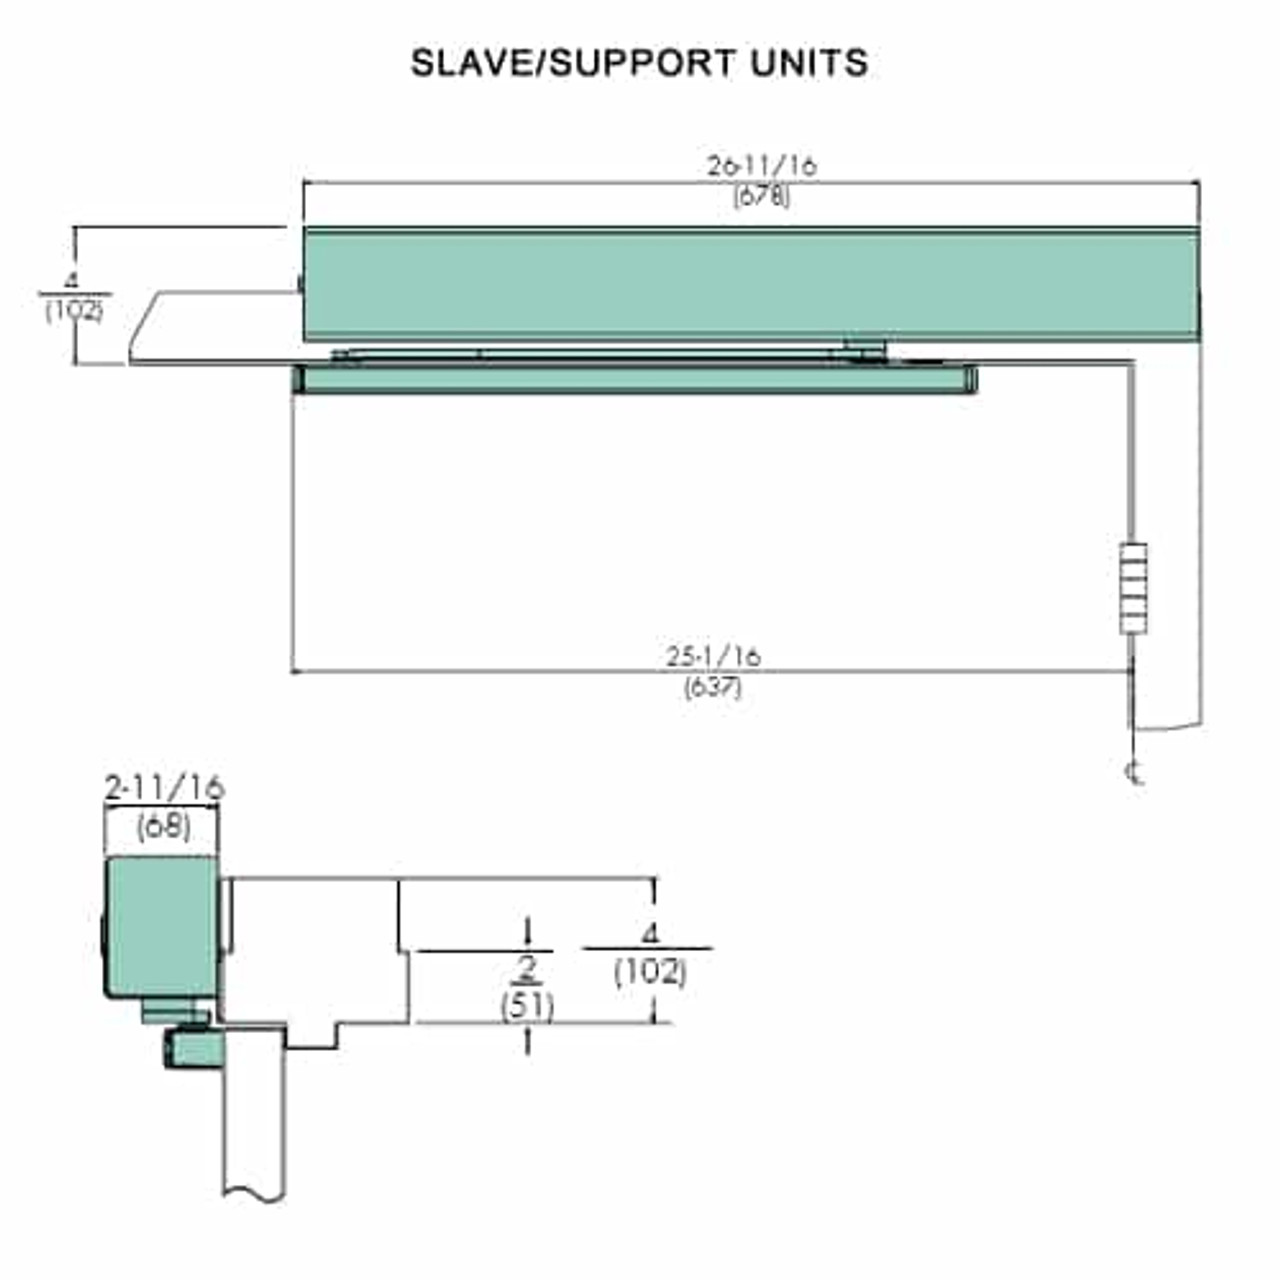 7254MPSO-LH-24VDC-691 Norton 7200 Series Electromechanical Closer and Holder with Double Egress Arm Slide Track Slave/Support Unit in Dull Bronze Finish